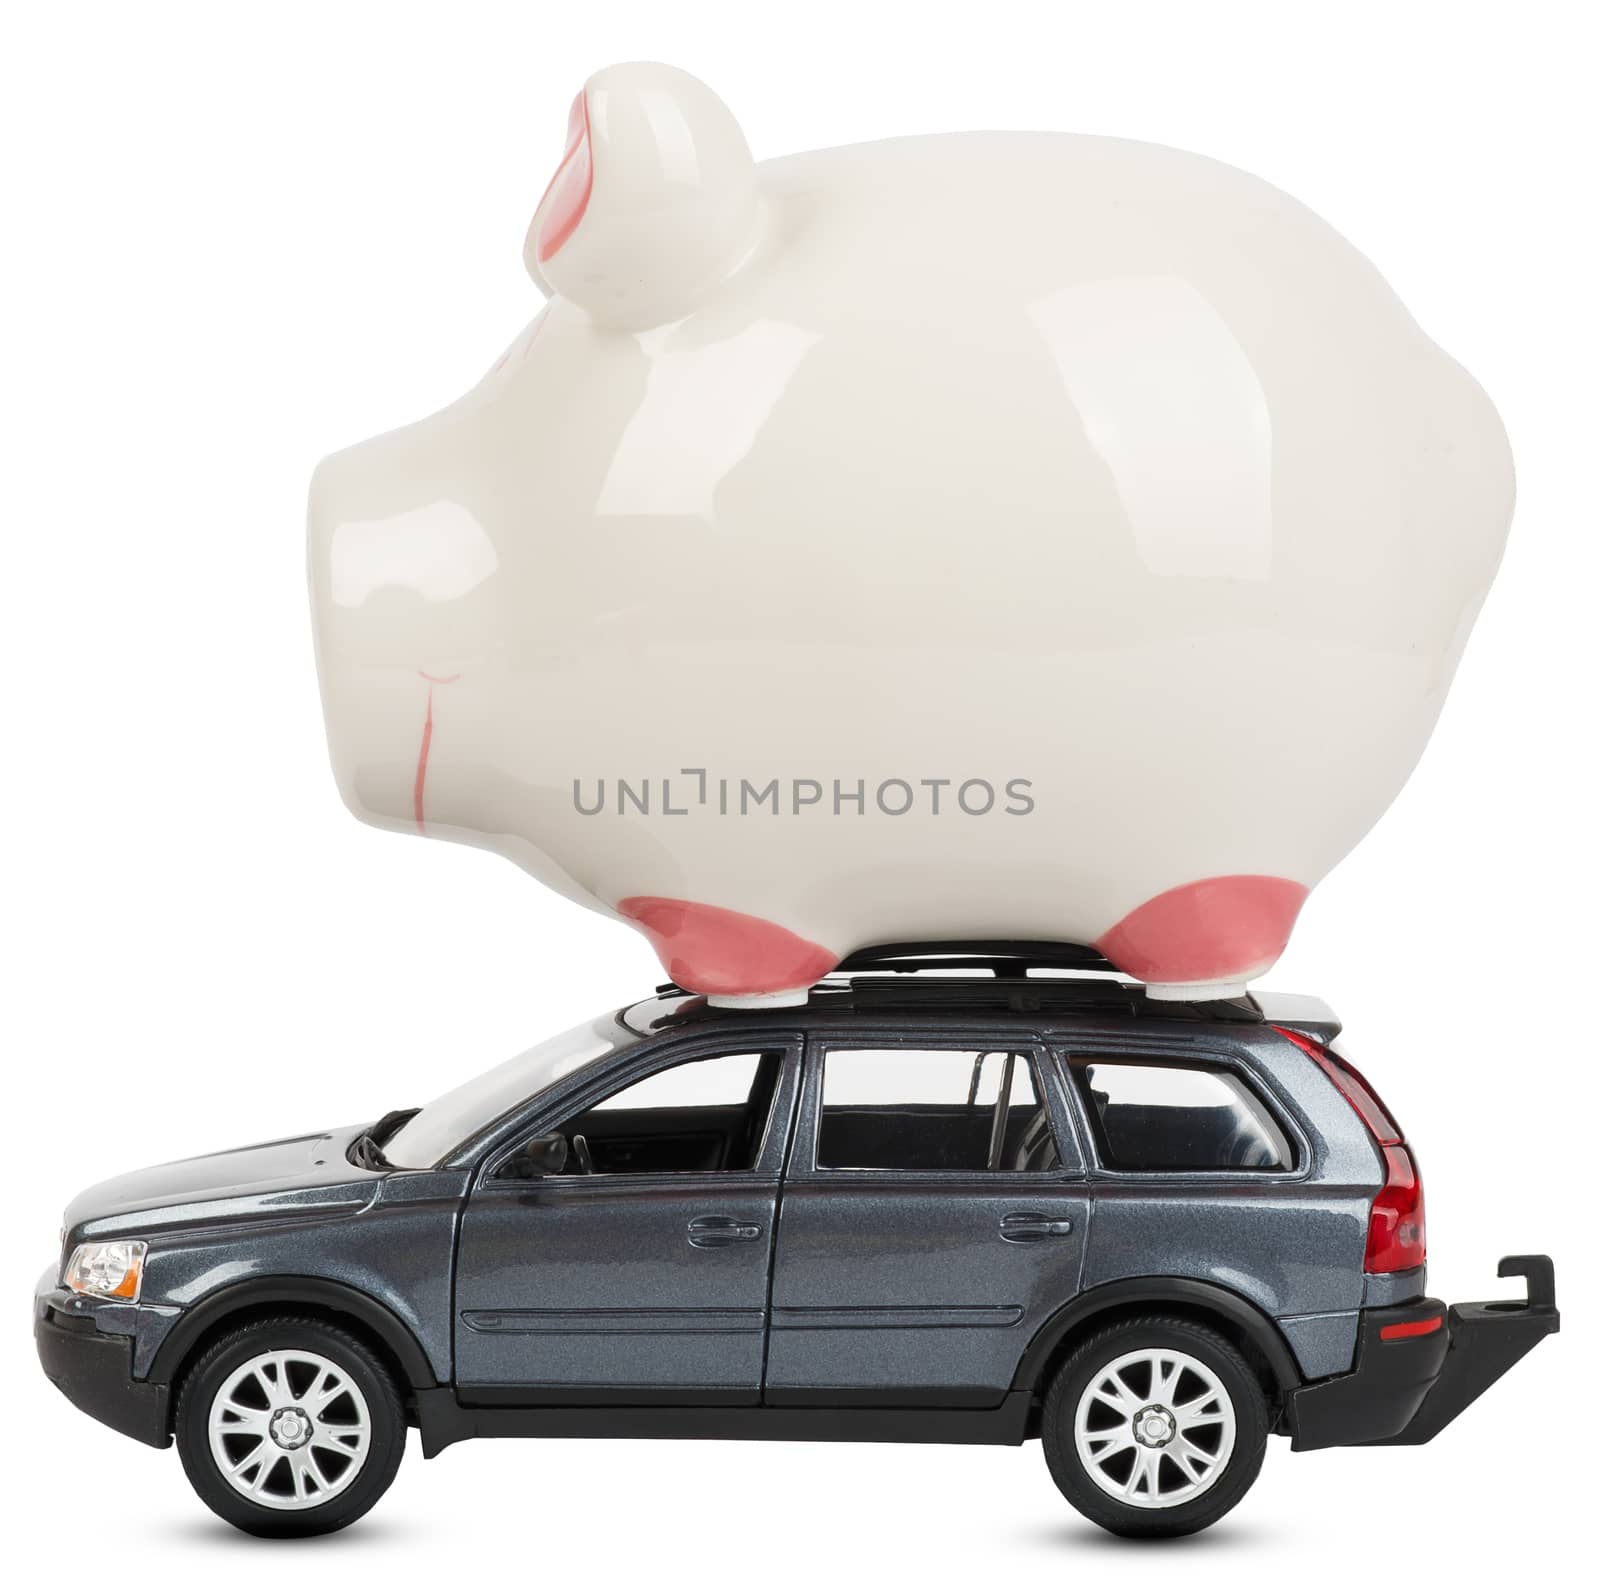 Piggy bank on car isolated on white background, side view